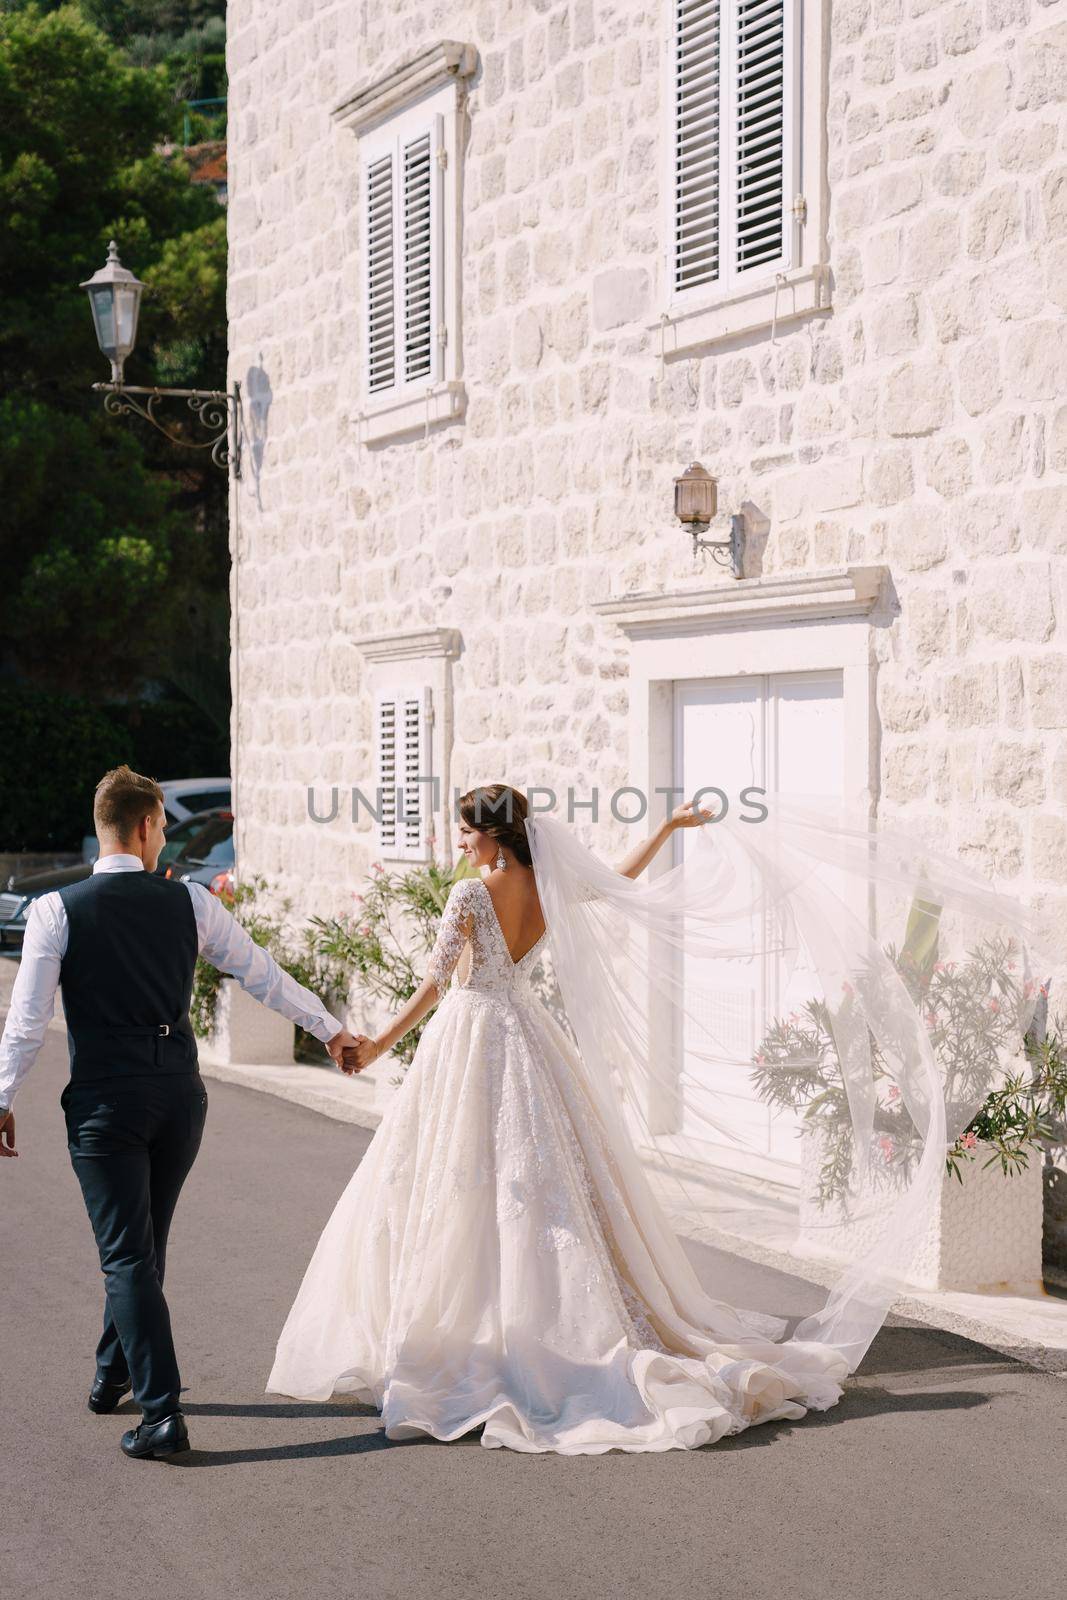 A wedding couple walks along the promenade against the background of a white old house, the bride waves a long veil, the groom holds her hand. Fine-art wedding photo in Montenegro, Perast. by Nadtochiy